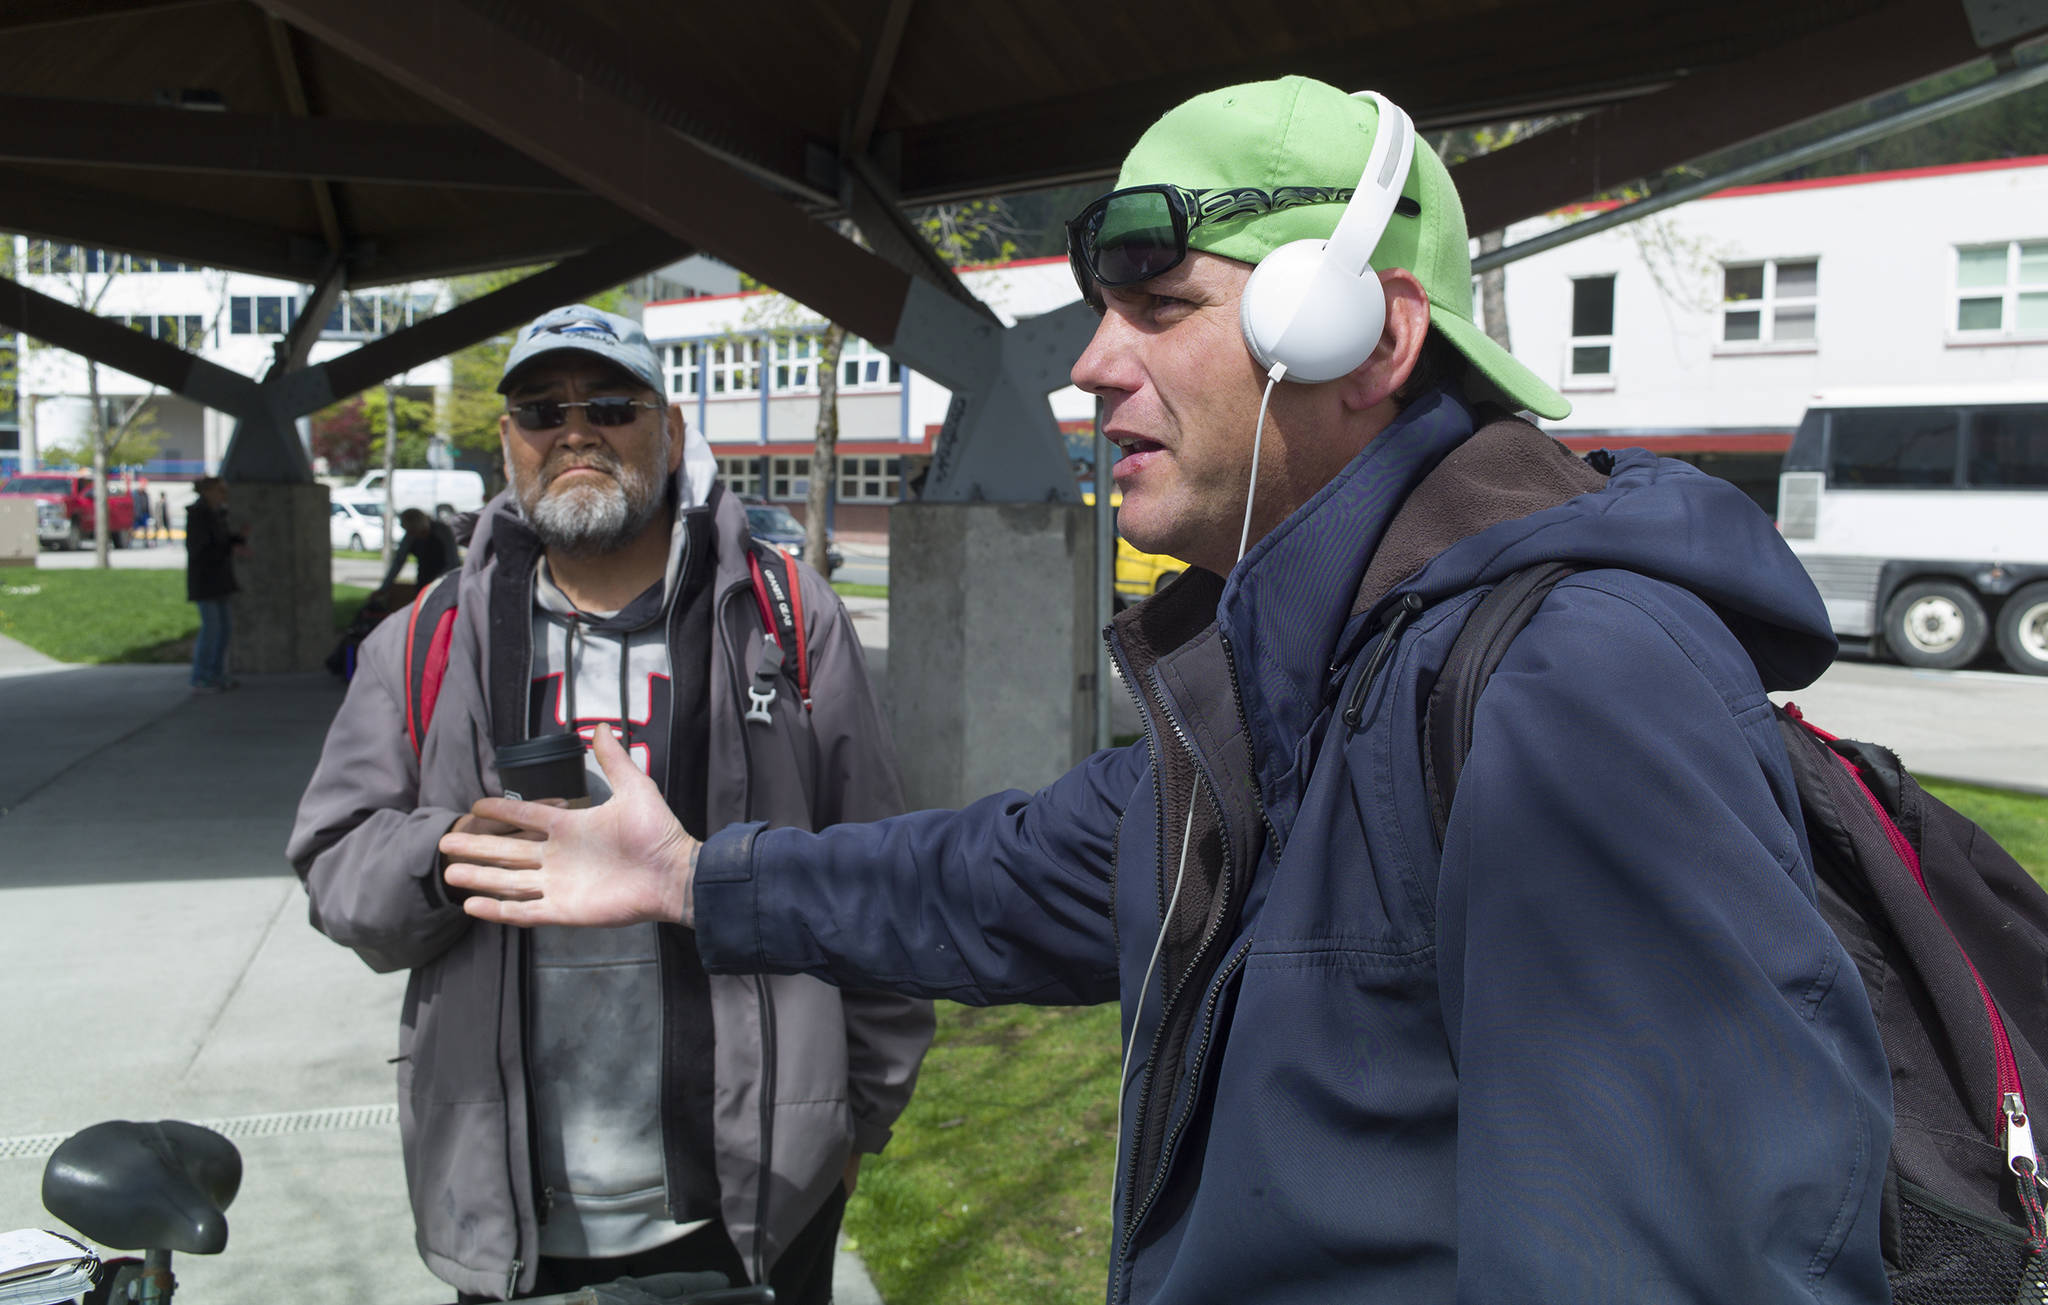 Chawn Summerall, right, and Everett Johnson talk about being harassed by police while at Marine Park on Tuesday, May 23, 2017. Juneau’s homeless population has moved from the doorways of South Franklin Street to Marine Park after the Assembly passed a no-camping ordinance earlier this year. (Michael Penn | Juneau Empire)